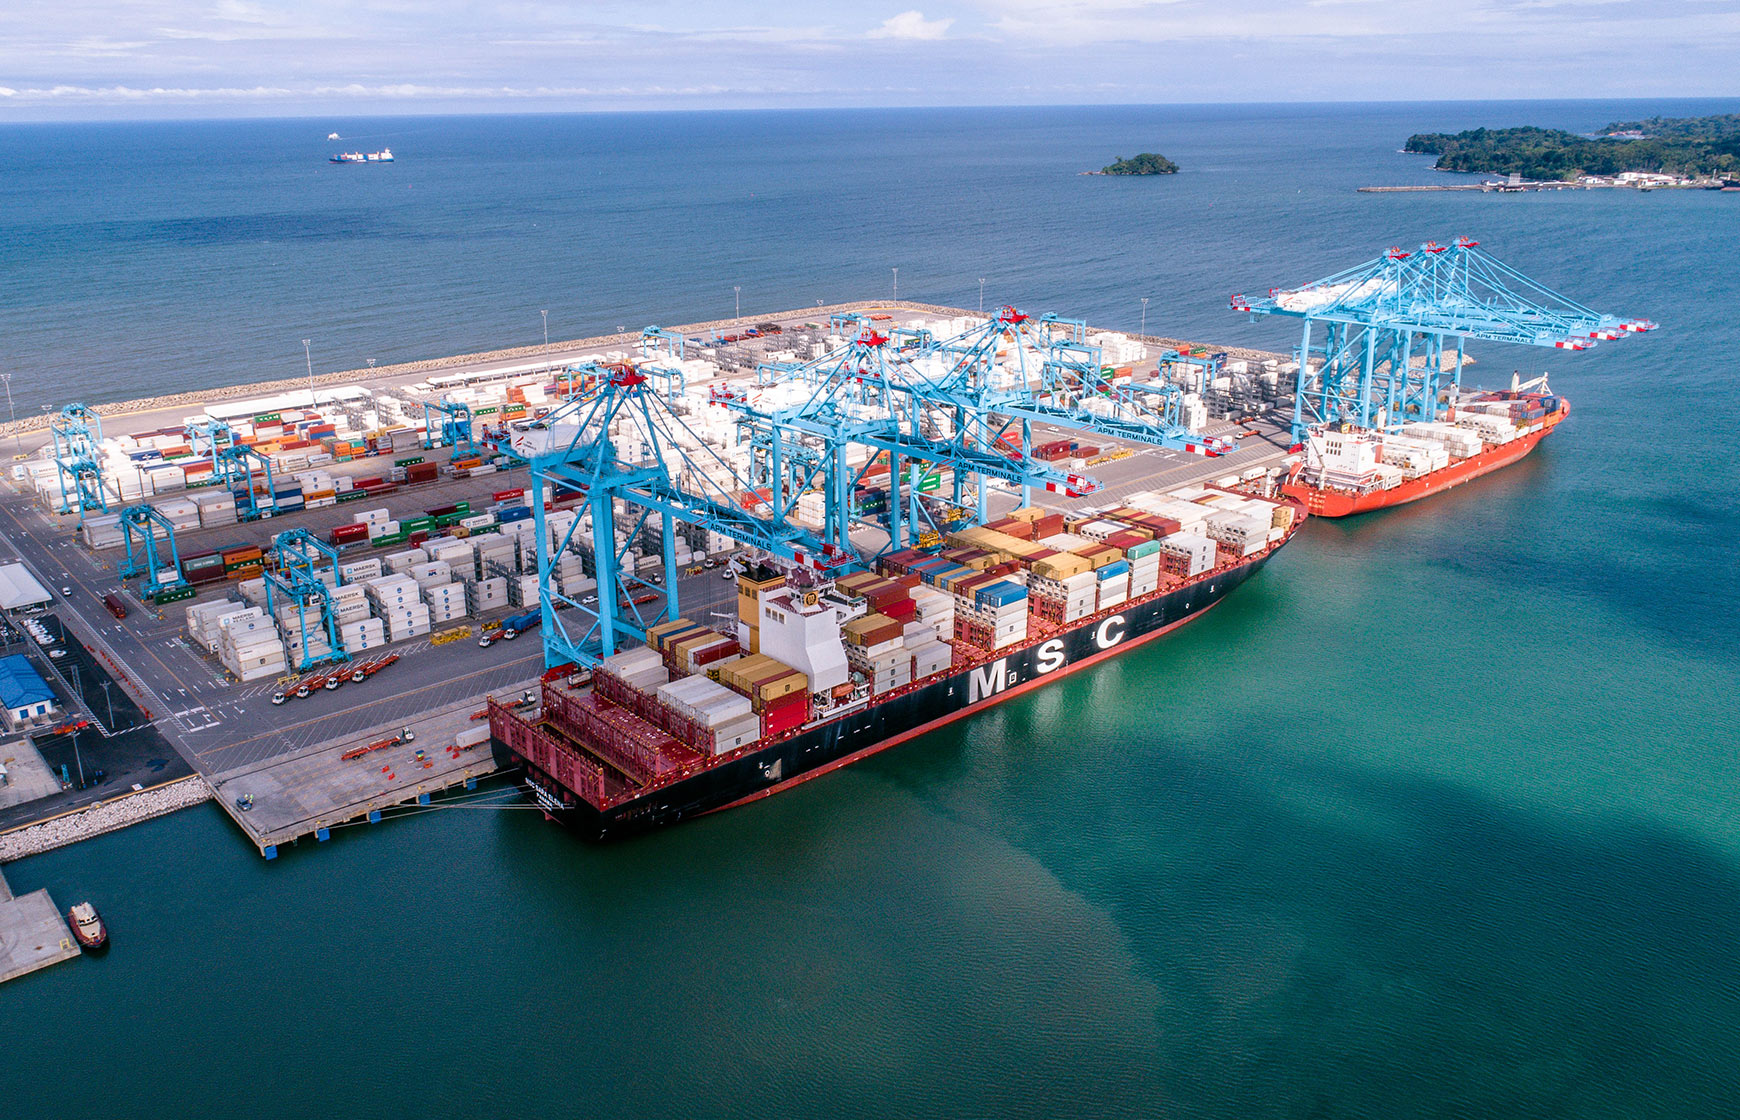 APM Terminals receives Costa Rica’s largest ever container ship This month APM Terminals Moín made history when it welcomed the MSC Sara Elena, the largest container ship to ever berth in Costa Rica, measuring 300m long and a capacity of 8,000 TEUs. In 337 lifts, exports of key Costa Rican exports, included pineapples and bananas, were loaded onto the Sara Elena destined for Rotterdam, the Netherlands. The vessel was in port for just under nine hours, including the obligatory first call celebrations.  This successful call once again validates the opportunity to serve Costa Rica’s economy with larger vessels. APM Terminals Moin has been consistently breaking its own gross moves per hour (GMPH) record, achieving GMPH of 28 in its first half year of operation. In this first phase, equipped with six Super-Post Panamax cranes and two berths with a draft of 14.5m, the terminal is capable of handling container ships of up to 8,500 TEUs, 24 hours a day, 7 days a week, 365 days per year. Upon the completion of the project’s final phase, the facility will cover double its current area of 40 hectares, with 5 berths, and be capable of handling vessels of up to 13,000 TEU, the largest size of vessels capable of passing through the Panama Canal locks. Source: APM Terminals